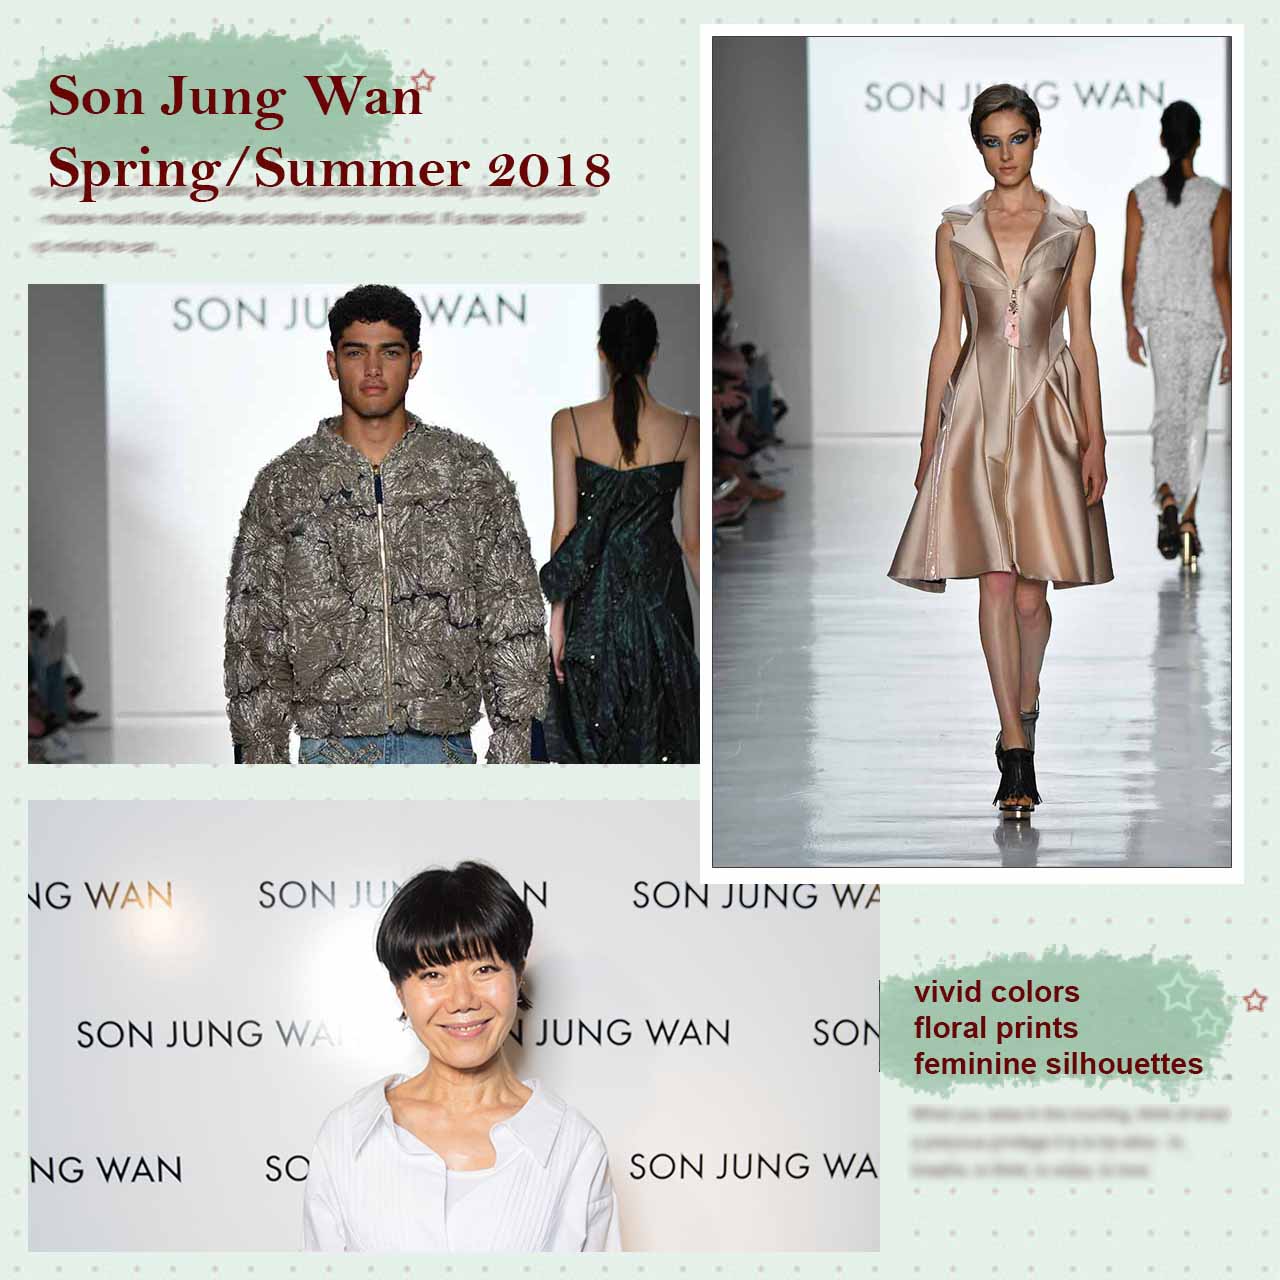 Son Jung Wan Spring 2018: The French Riviera